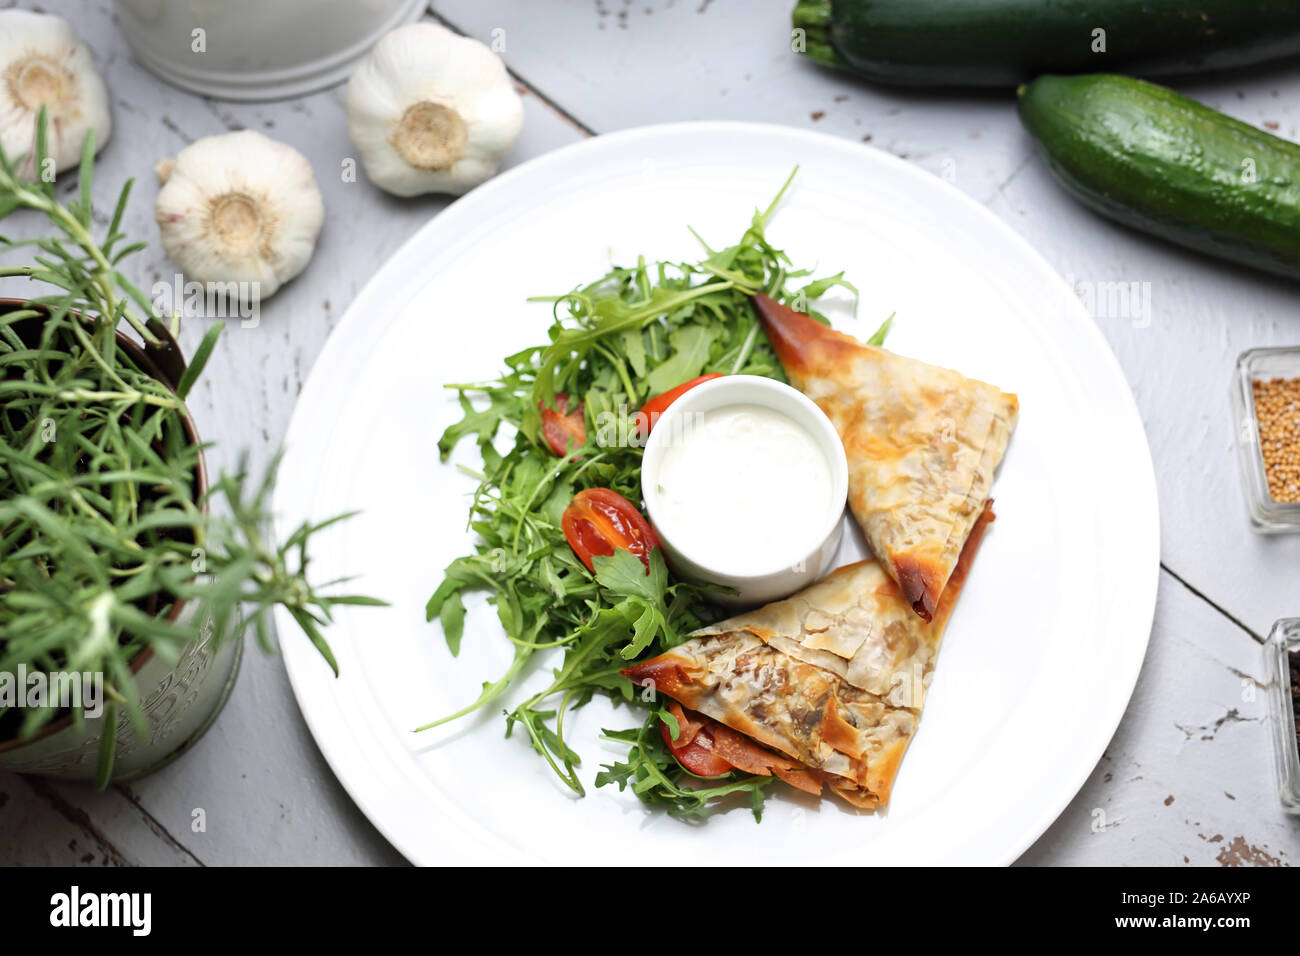 Vegetarian food. Dumplings made of filo dough stuffed with vegetables and mushrooms, served with garlic sauce and green salad Stock Photo